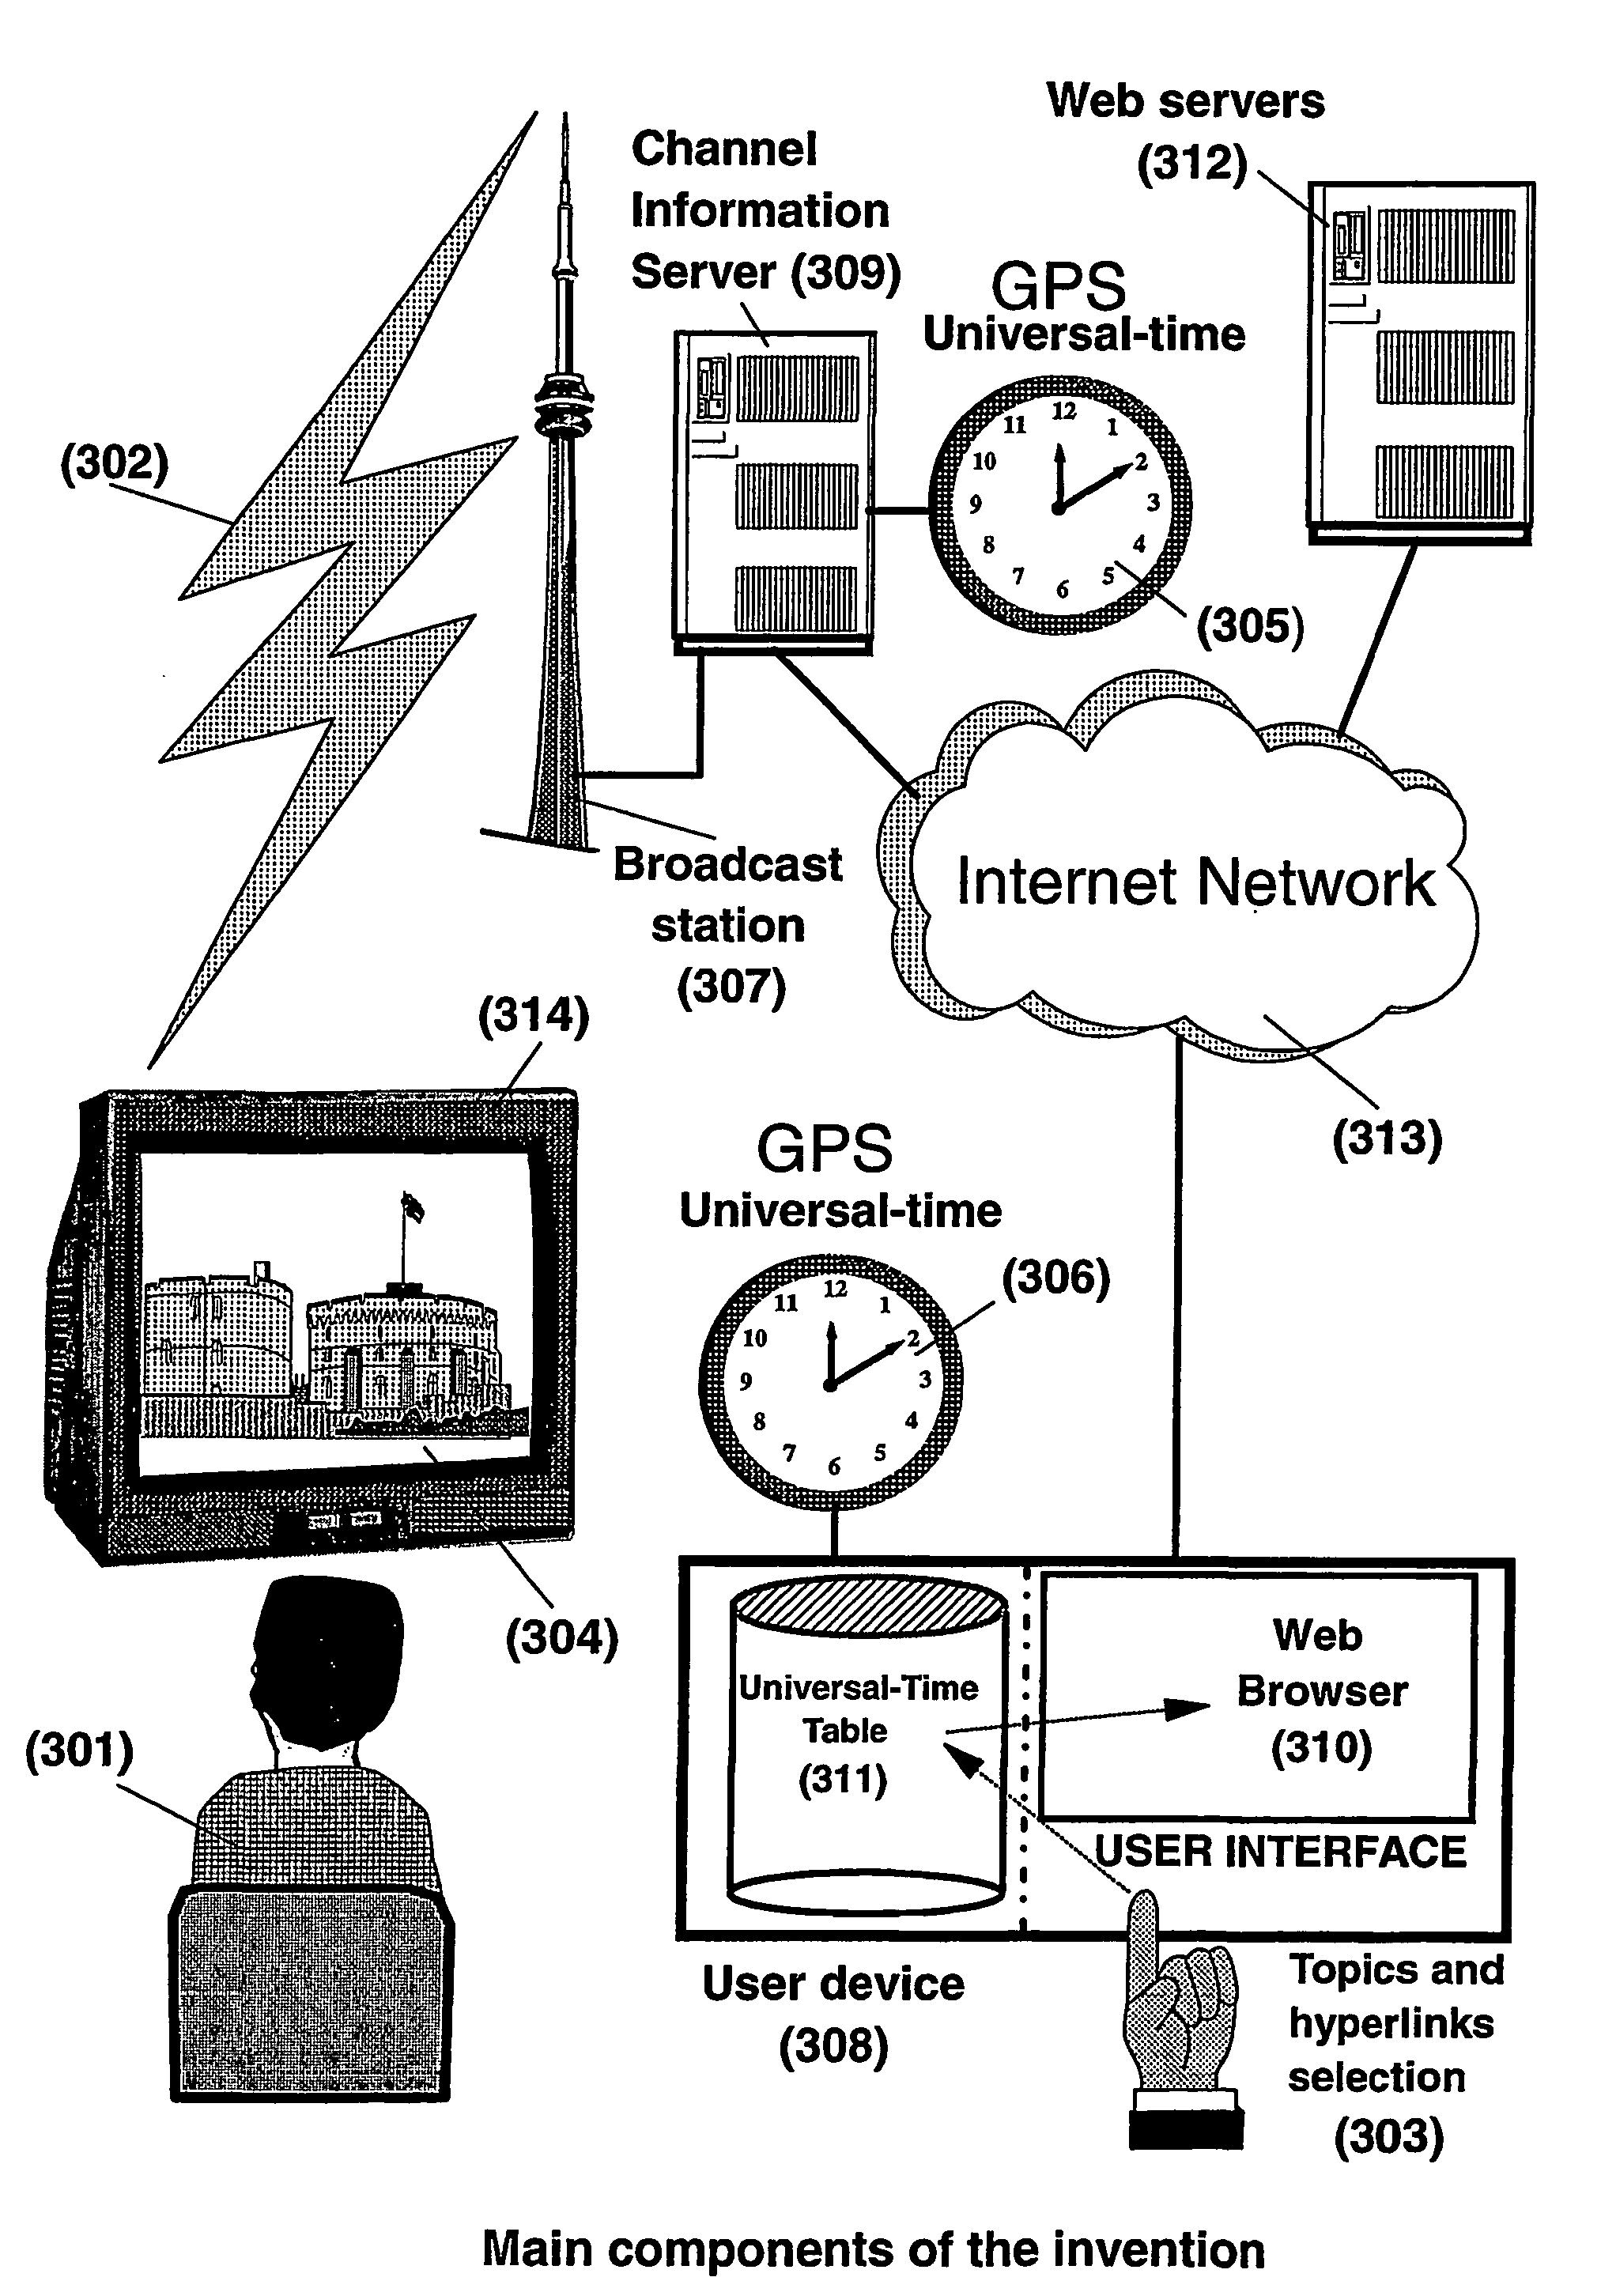 System and method for enhancing broadcast programs with information on the world wide web